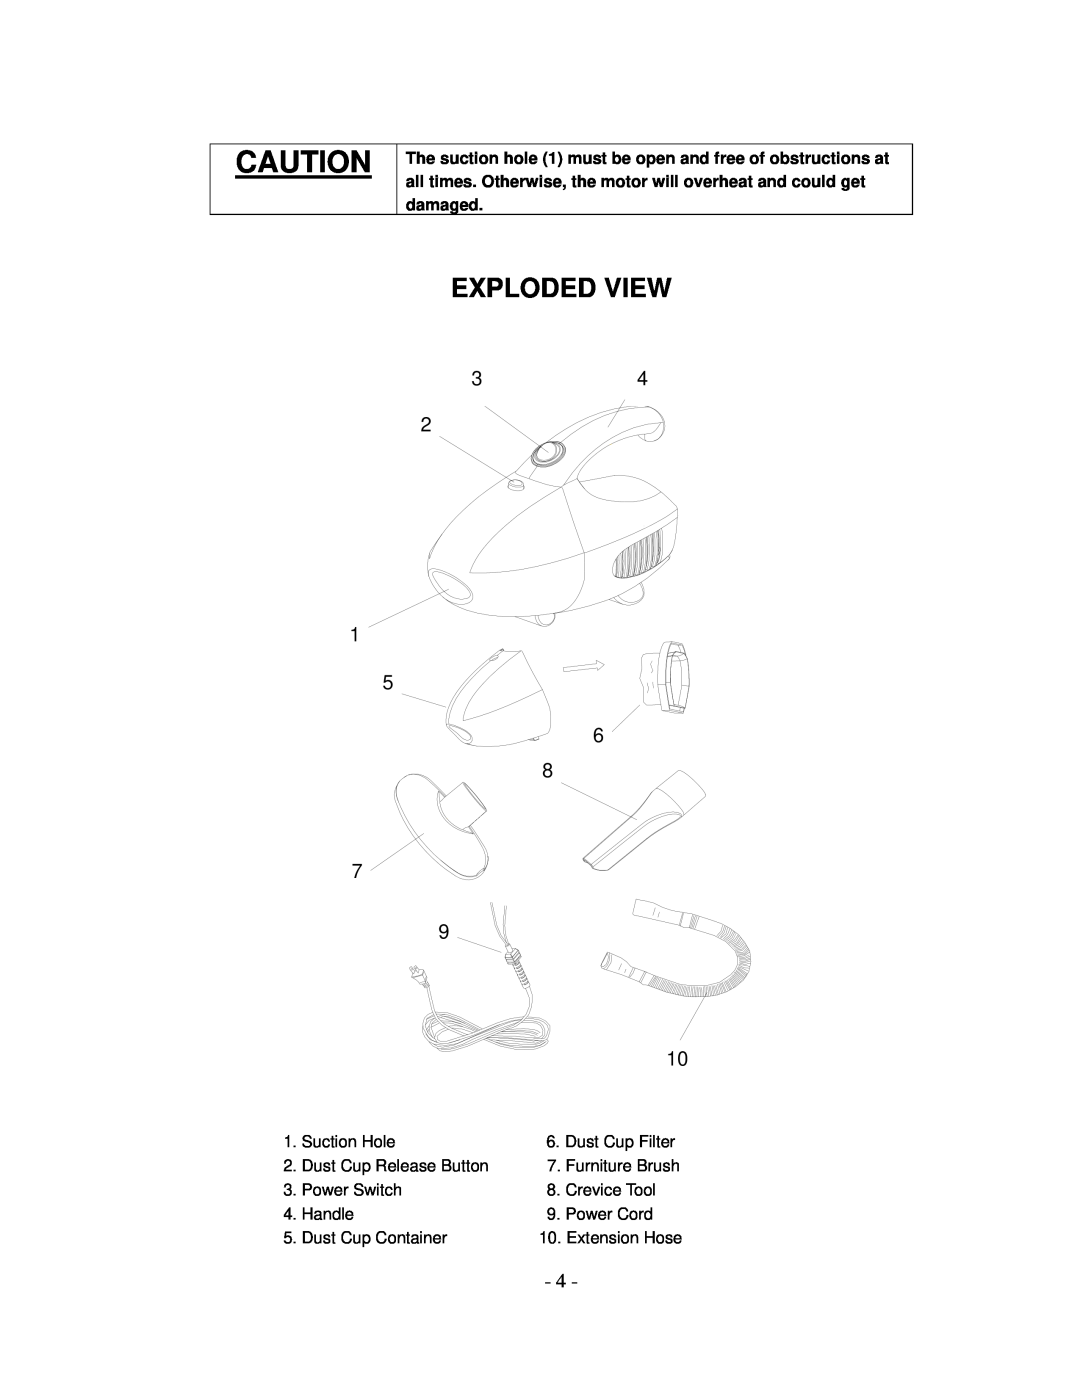 Sunbeam SBH-200 manual Exploded View, 34 2 1 5 6 8 7 